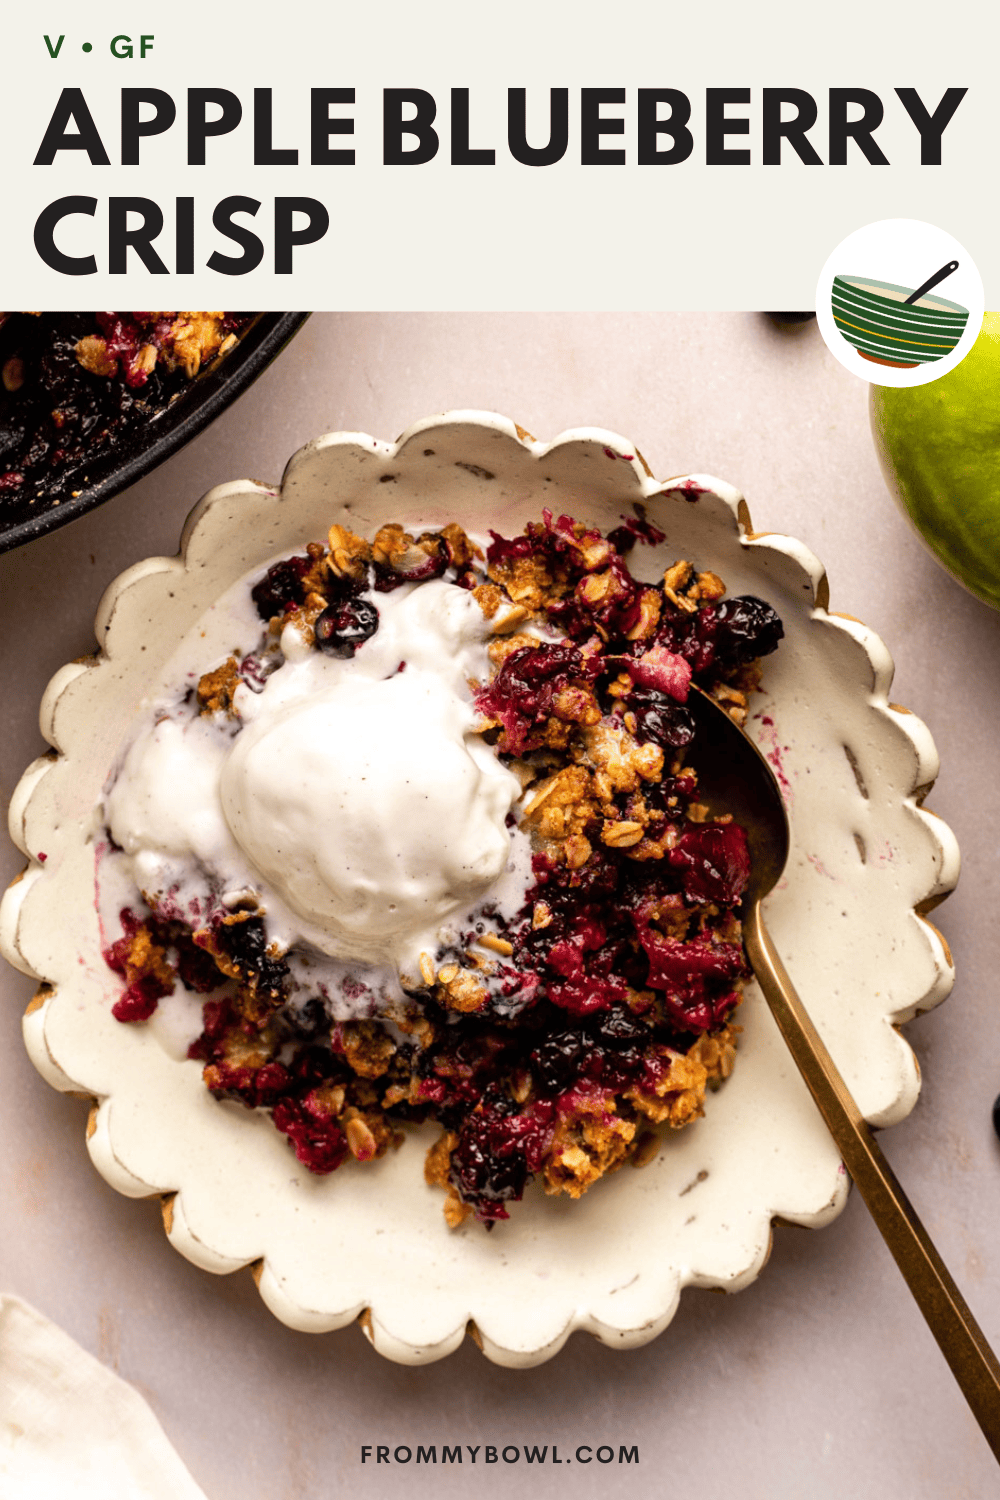 apple blueberry crisp served in a white plate with a scoop of ice cream on top and a spoon ready to dig in